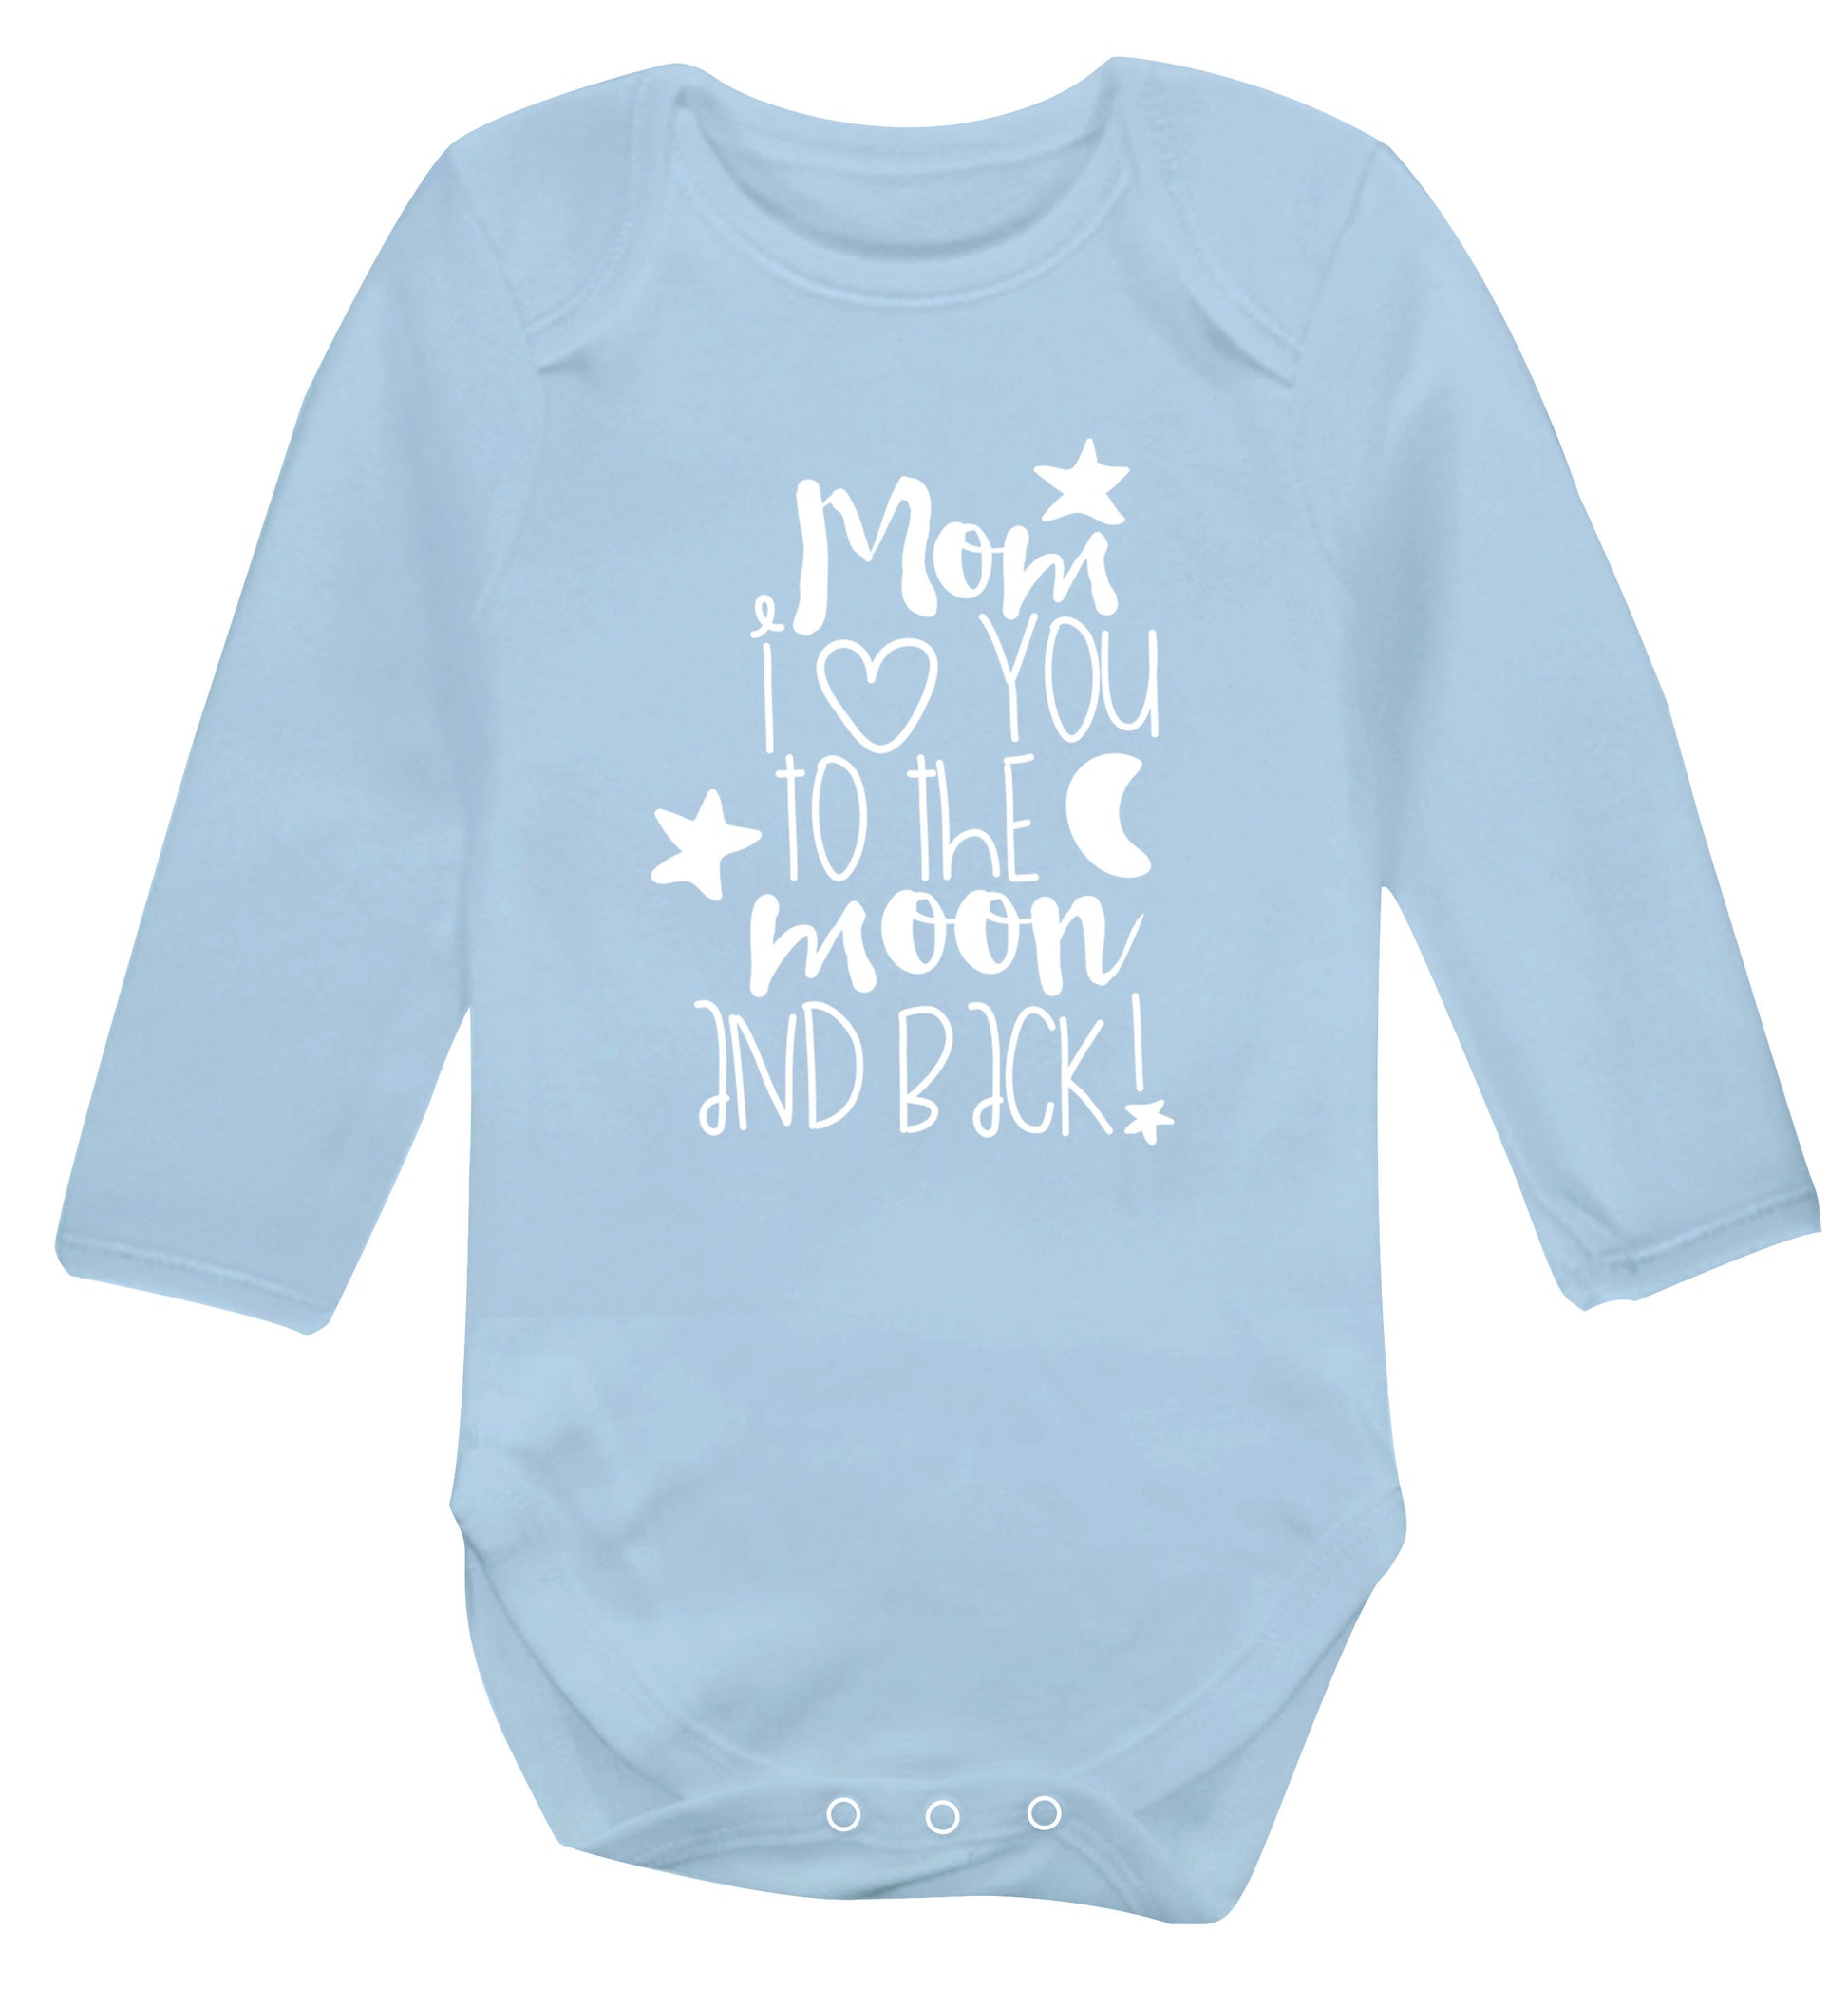 Dad I love you to the moon and back Baby Vest long sleeved pale blue 6-12 months